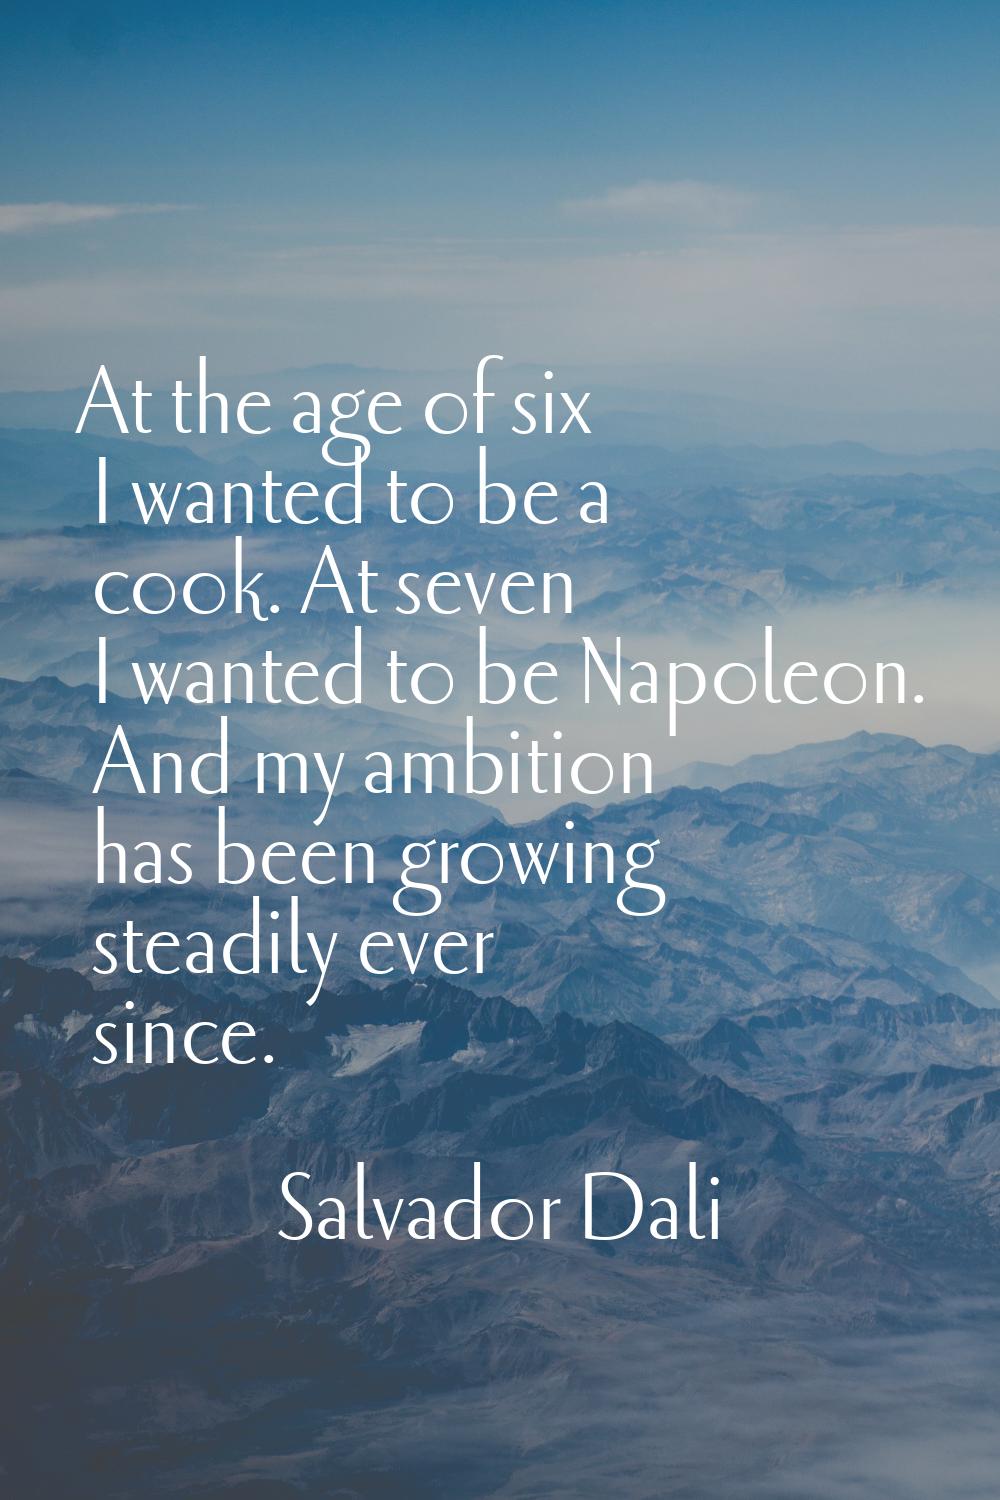 At the age of six I wanted to be a cook. At seven I wanted to be Napoleon. And my ambition has been